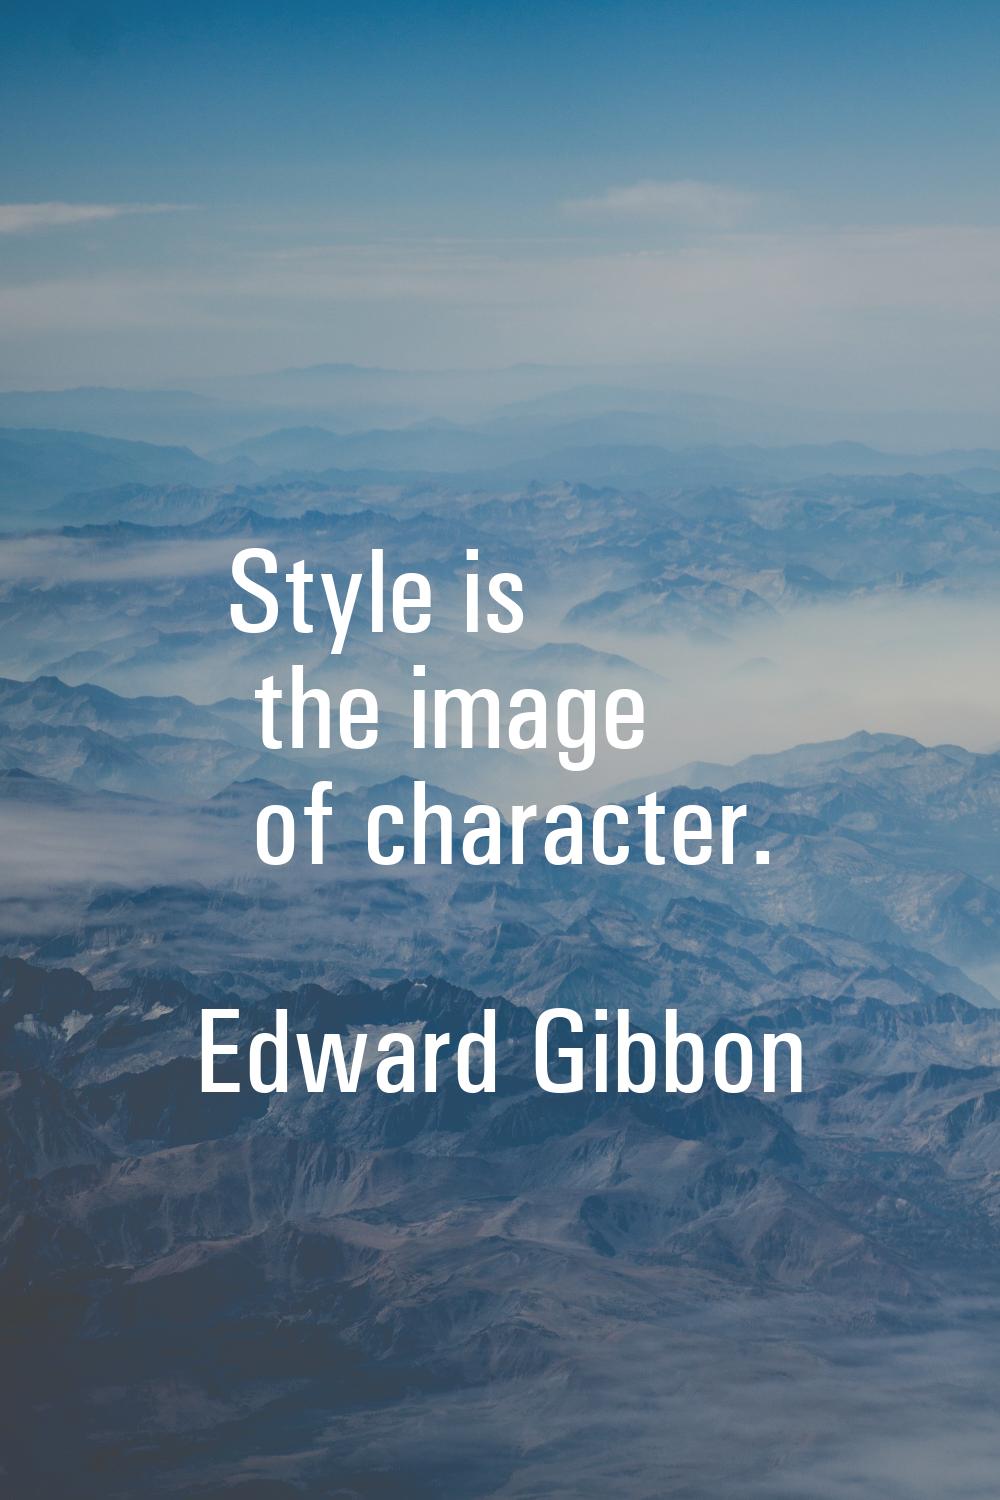 Style is the image of character.